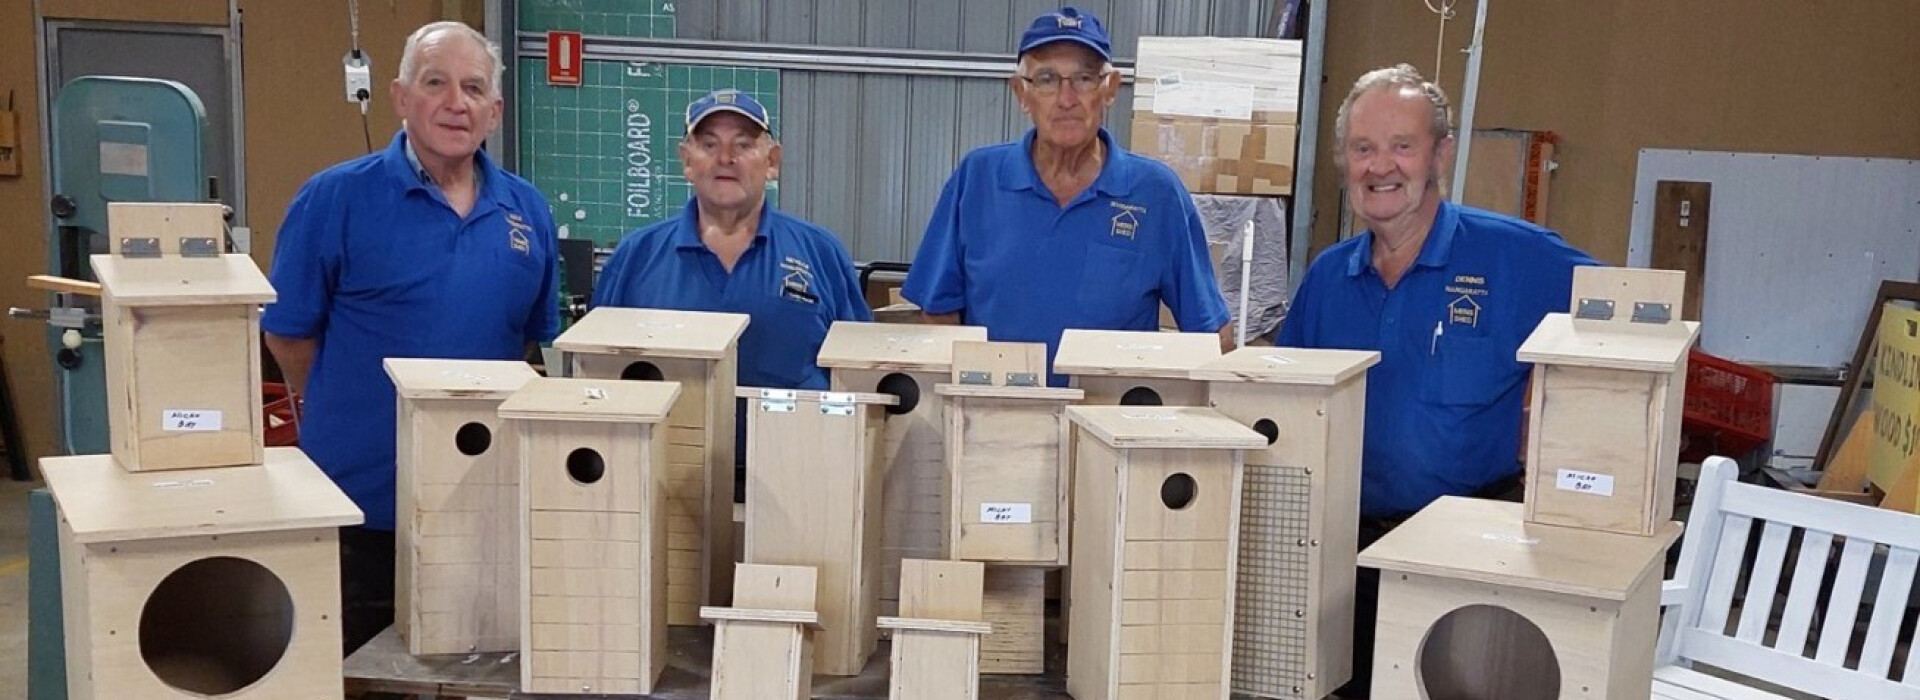 Building nest boxes with the Men's Shed